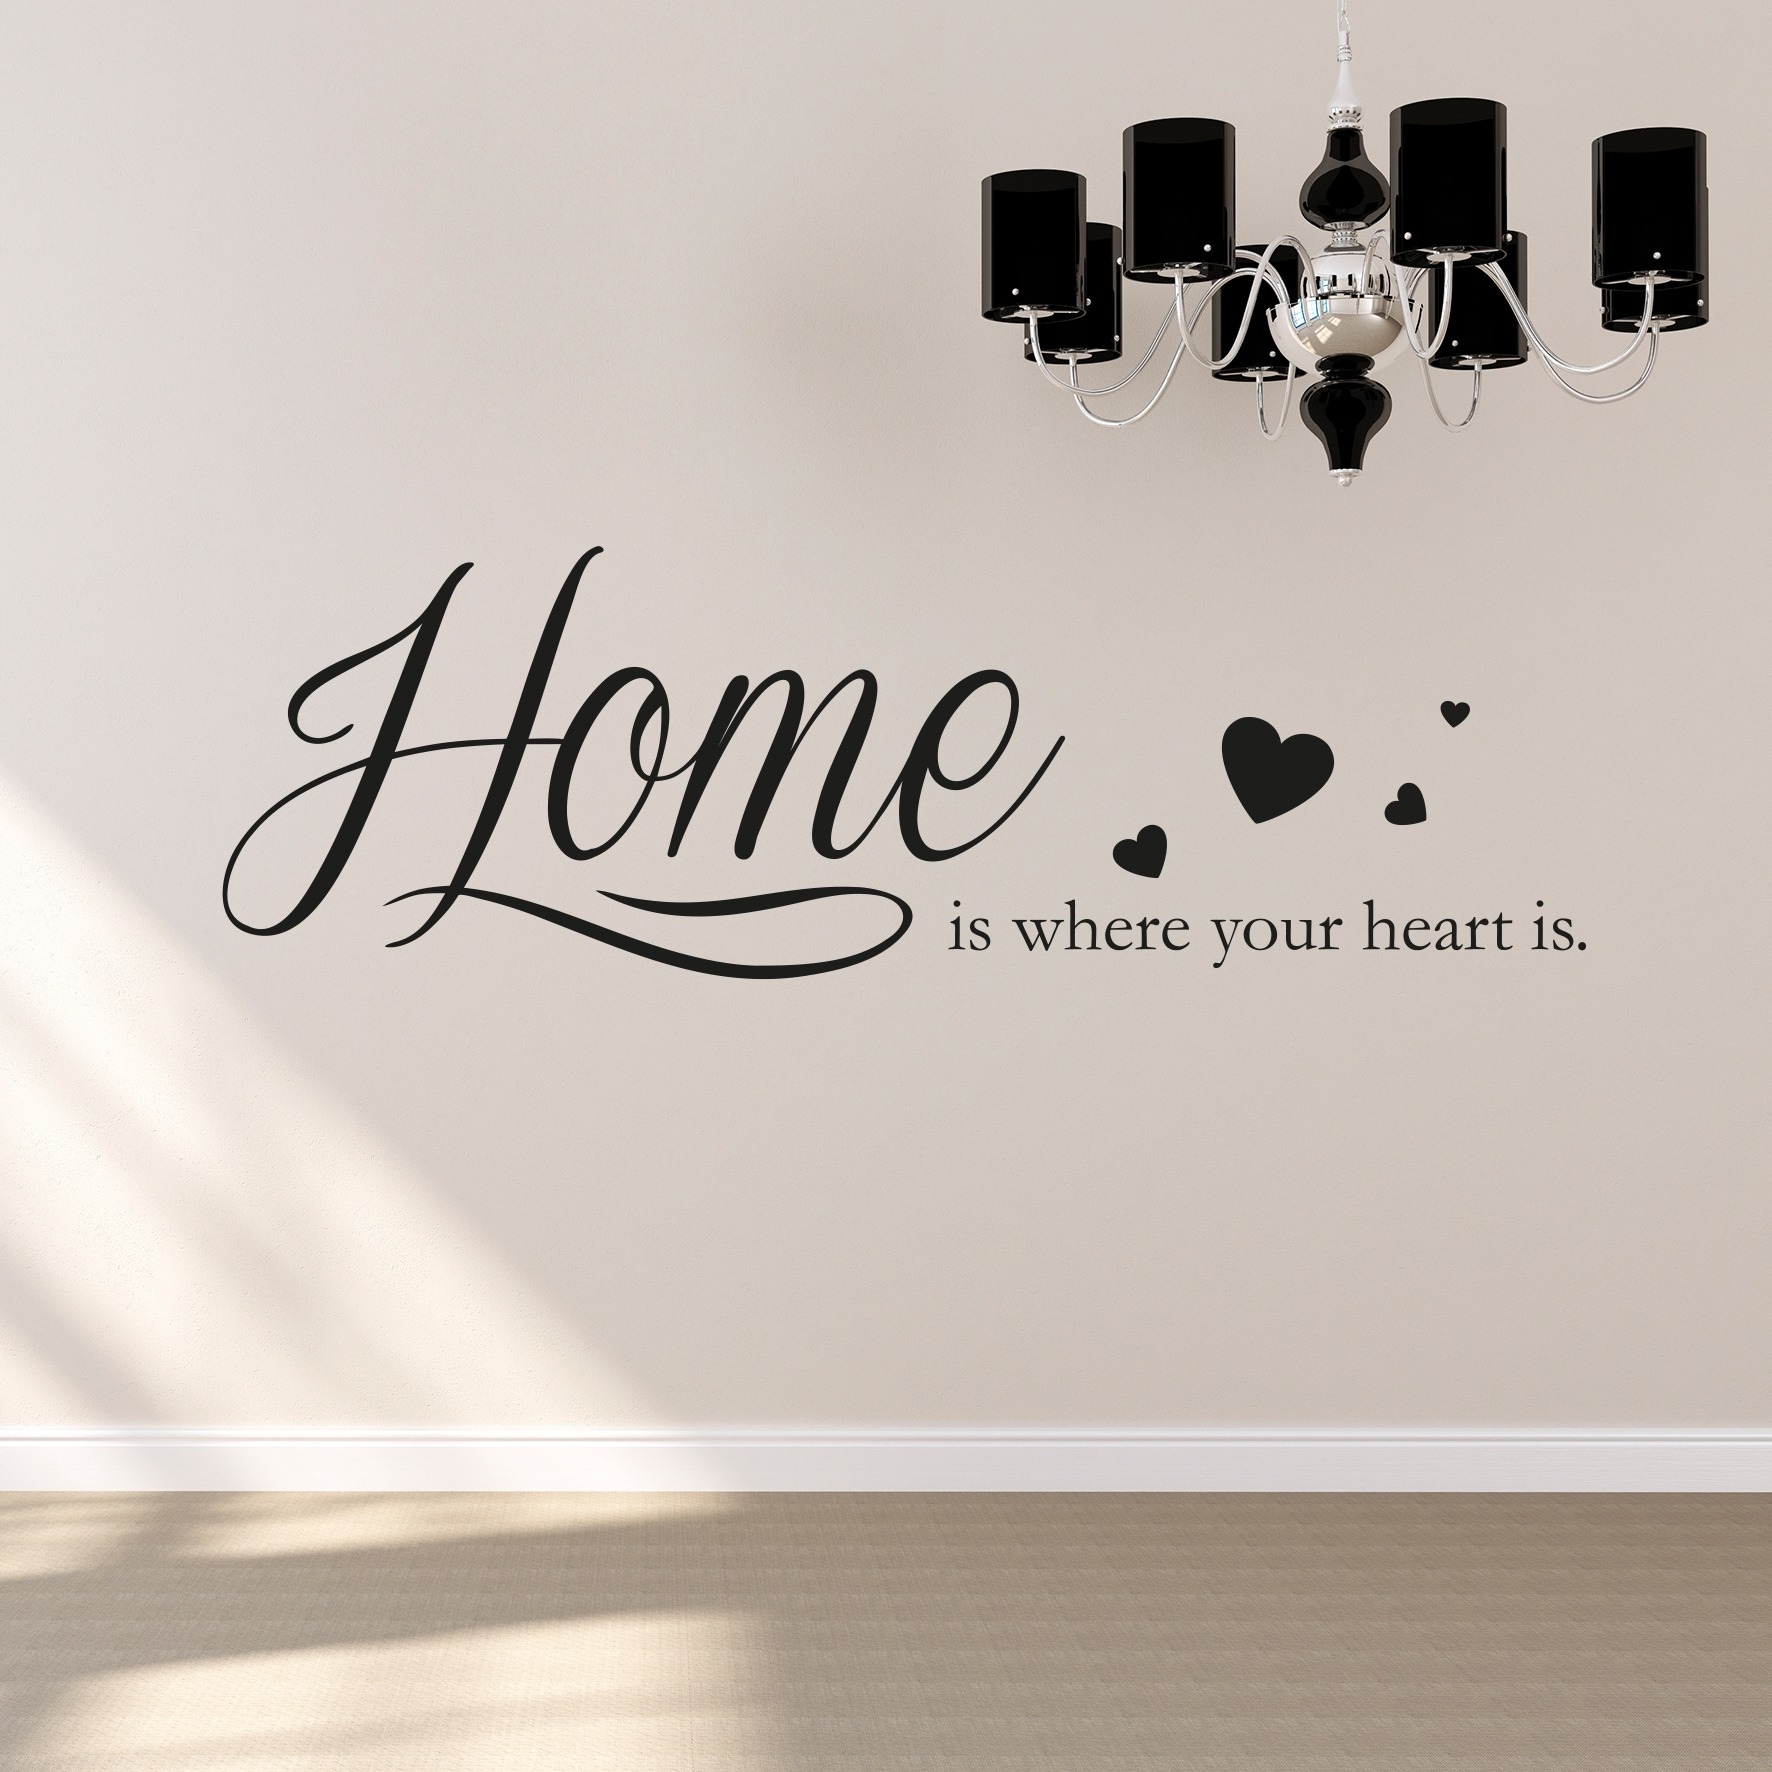 queence Wandtattoo »Home is your 30 kaufen BAUR where | cm x heart 120 is«